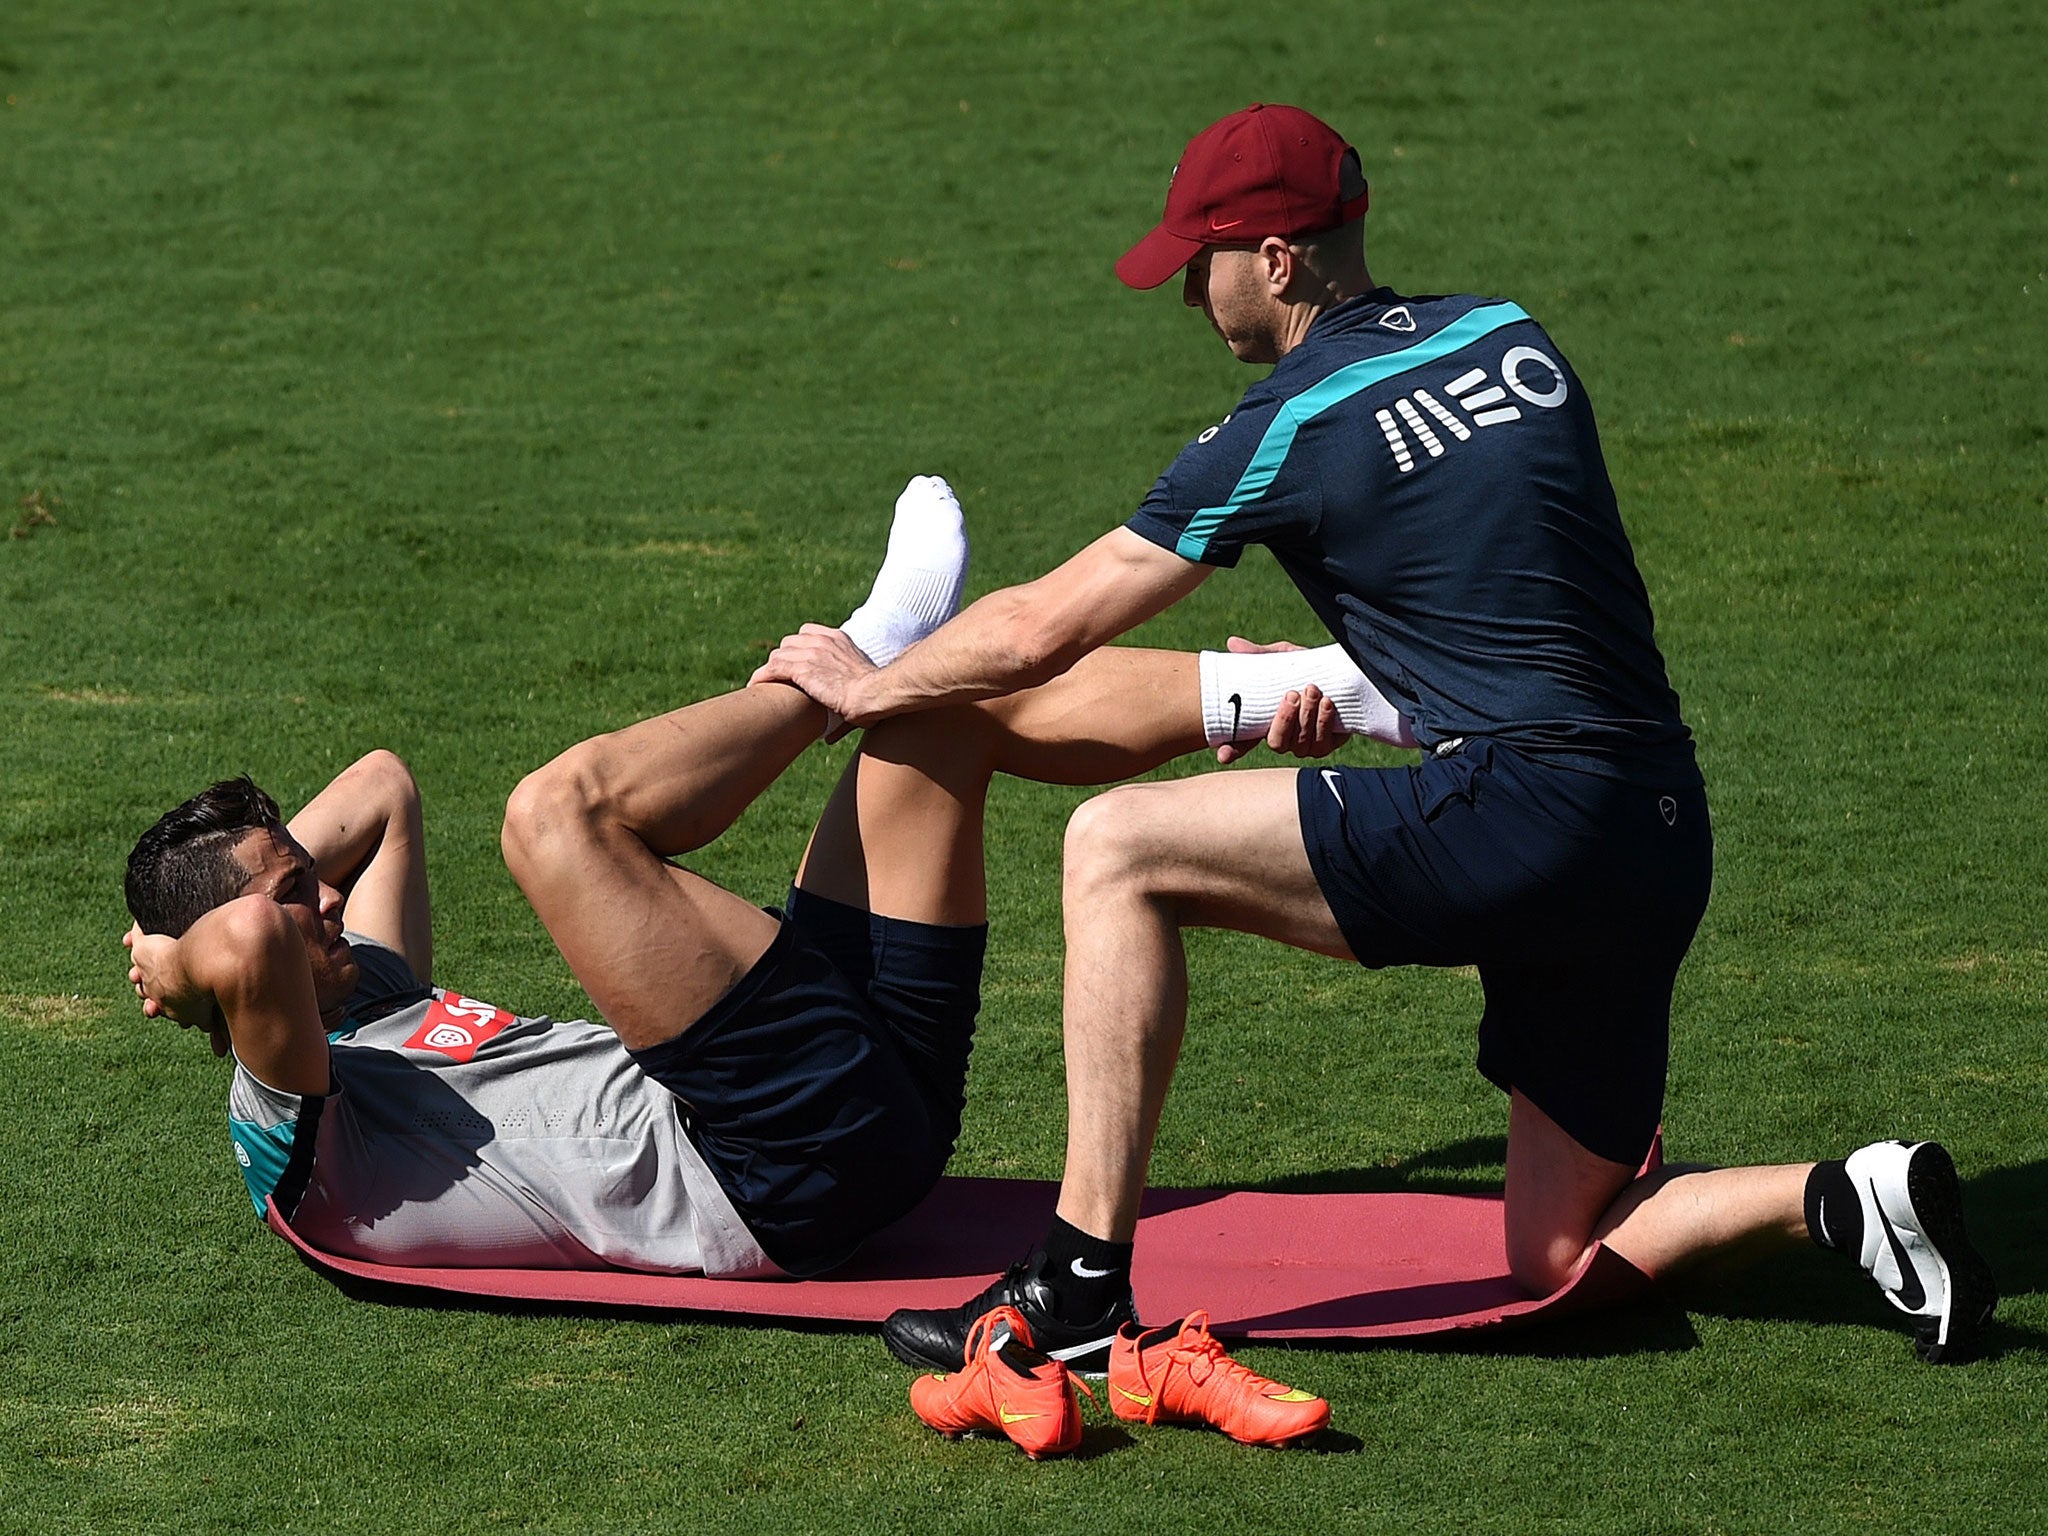 Cristiano Ronaldo receiving medical attention for his knee in training